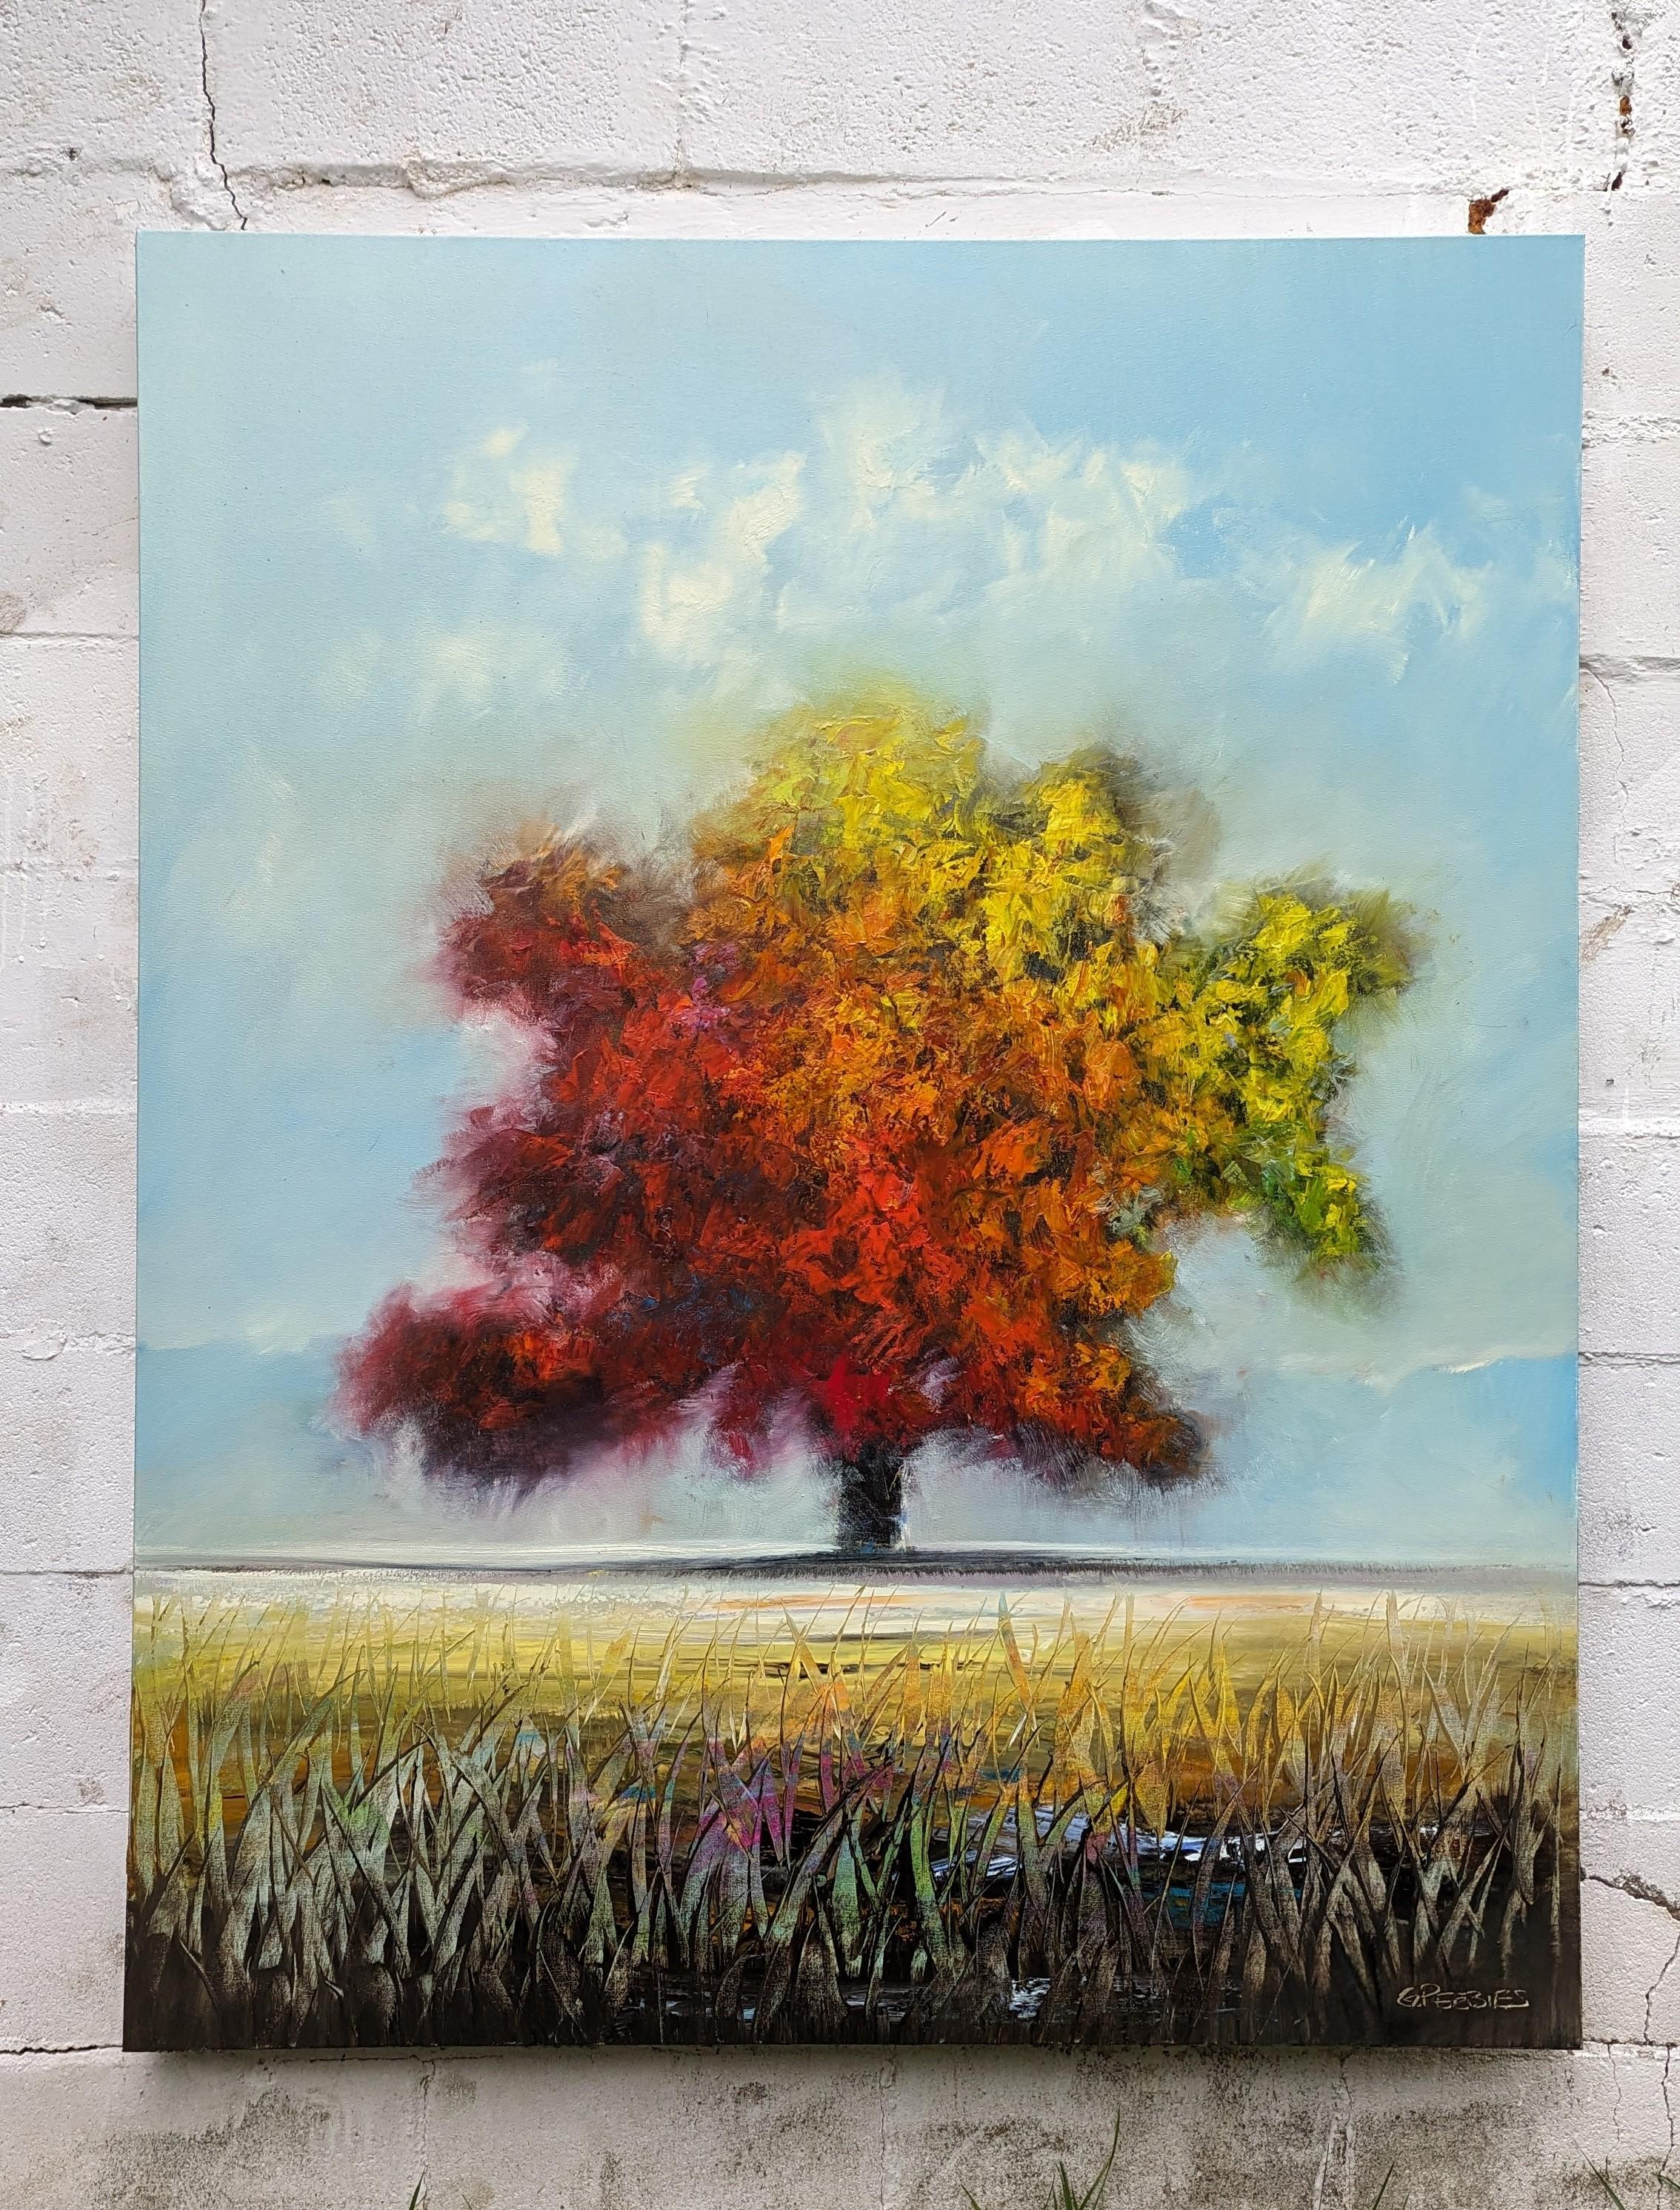 <p>Artist Comments<br>Artist George Peebles presents his interpretation of fall at its finest. The tree, adorned with red, orange, and yellow leaves, stands towering amid an expansive field. The tall, wispy grasses in the foreground create depth and